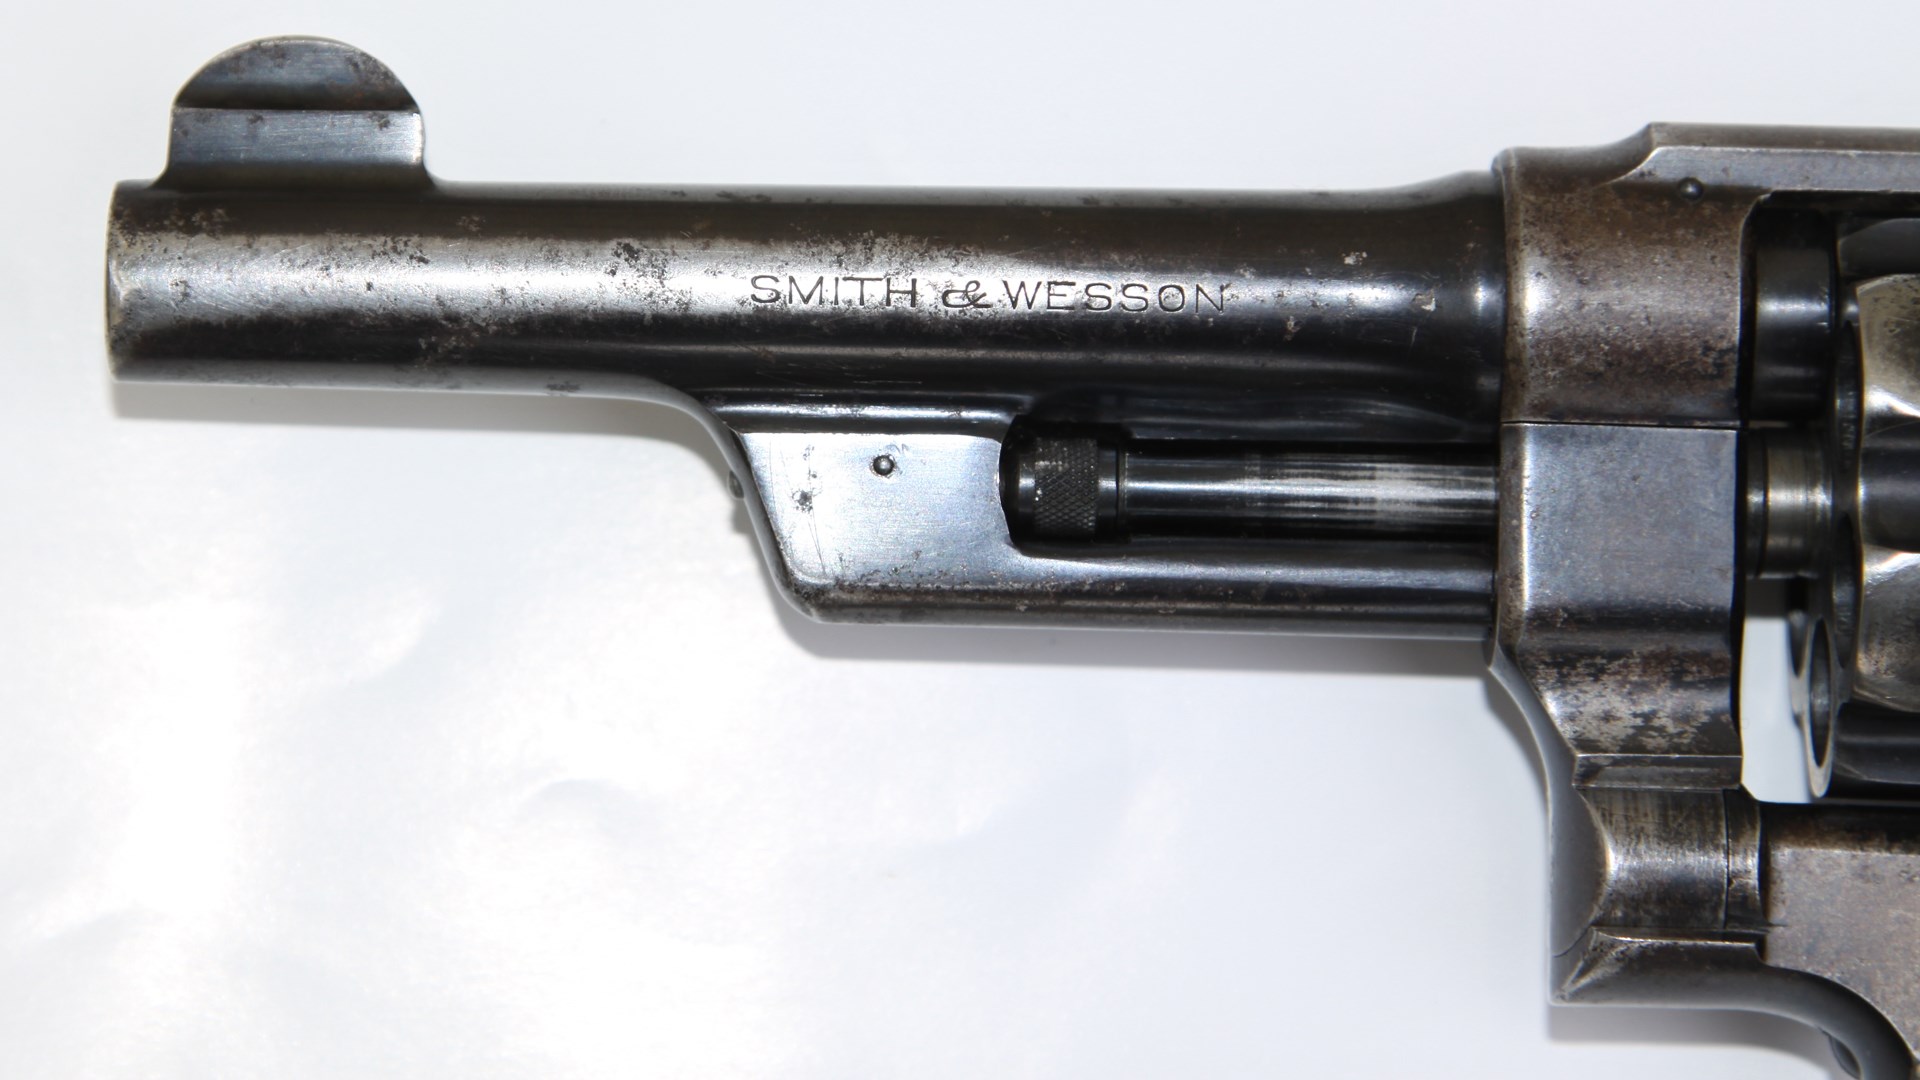 The Wolf & Klar Model brought back the under-barrel shroud, but without the third locking device for the cylinder, as it was deemed both expensive and unnecessary.